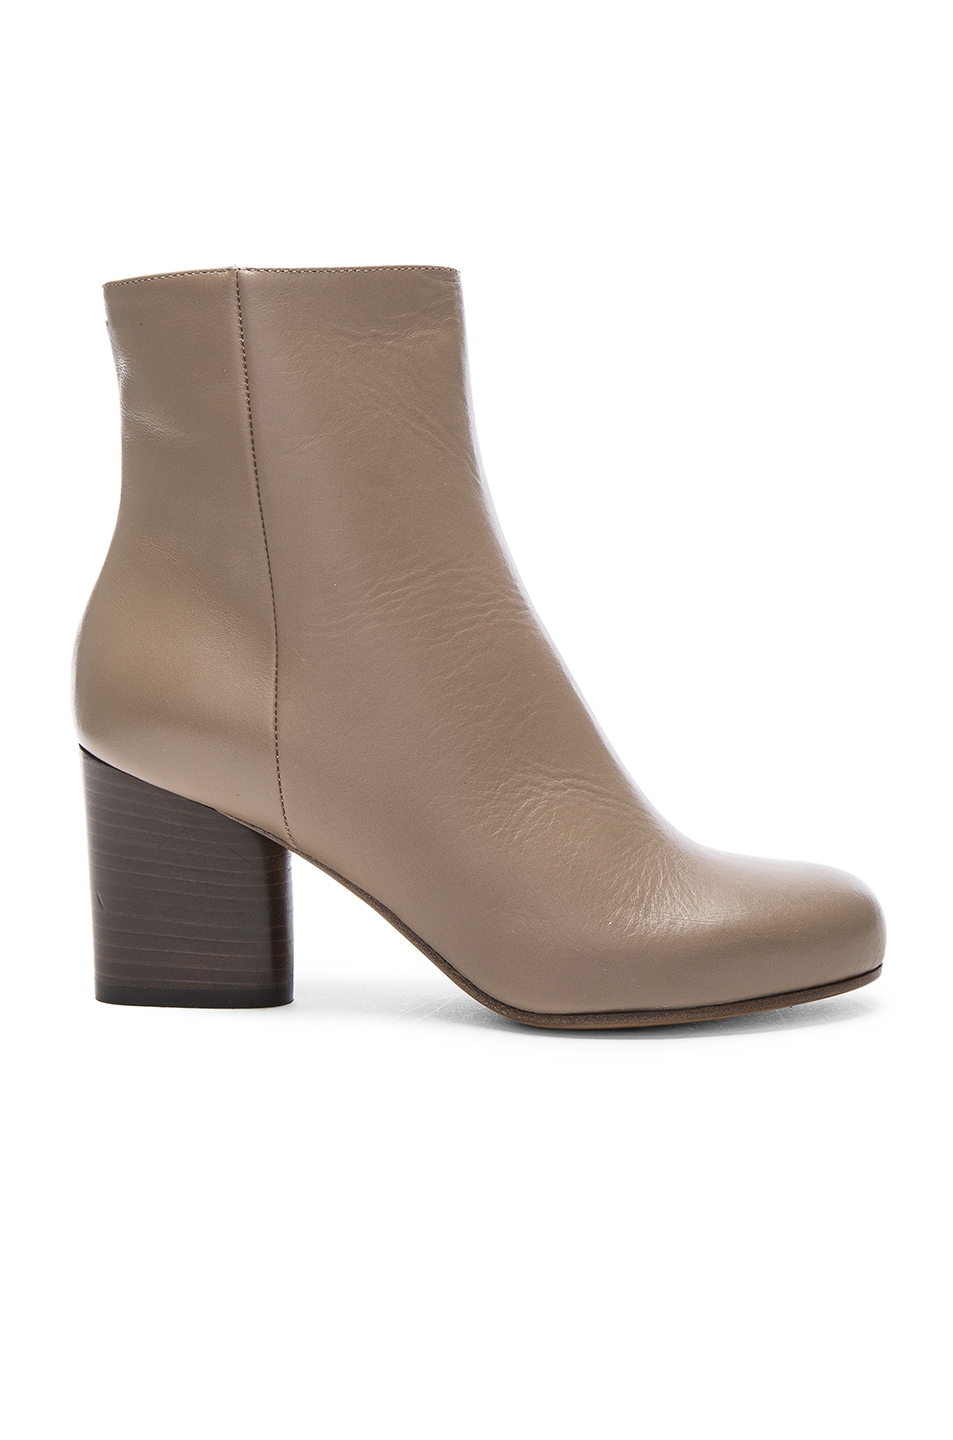 Image 1 of Maison Margiela Leather Booties in Mud